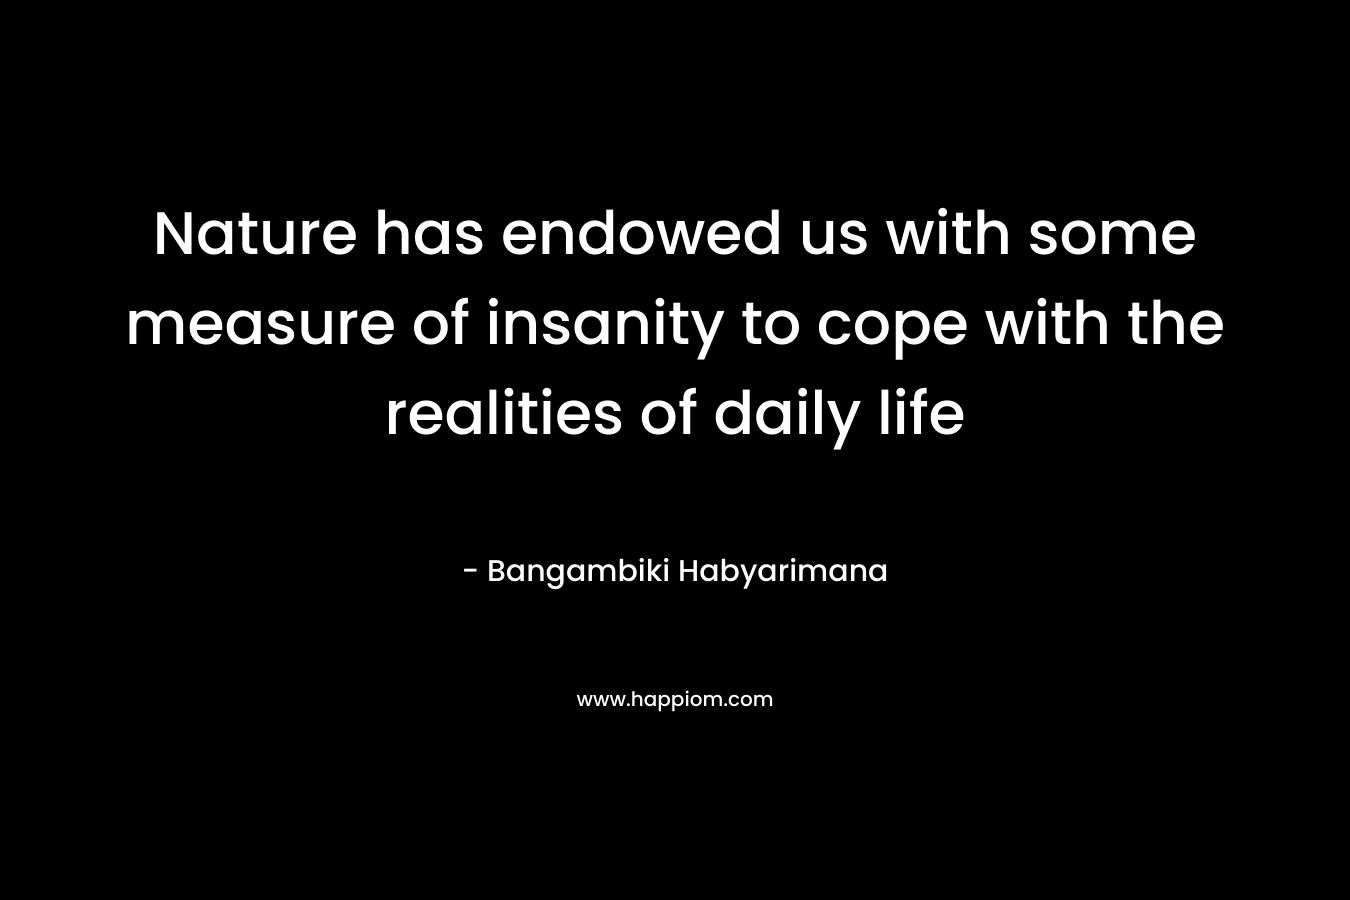 Nature has endowed us with some measure of insanity to cope with the realities of daily life – Bangambiki Habyarimana